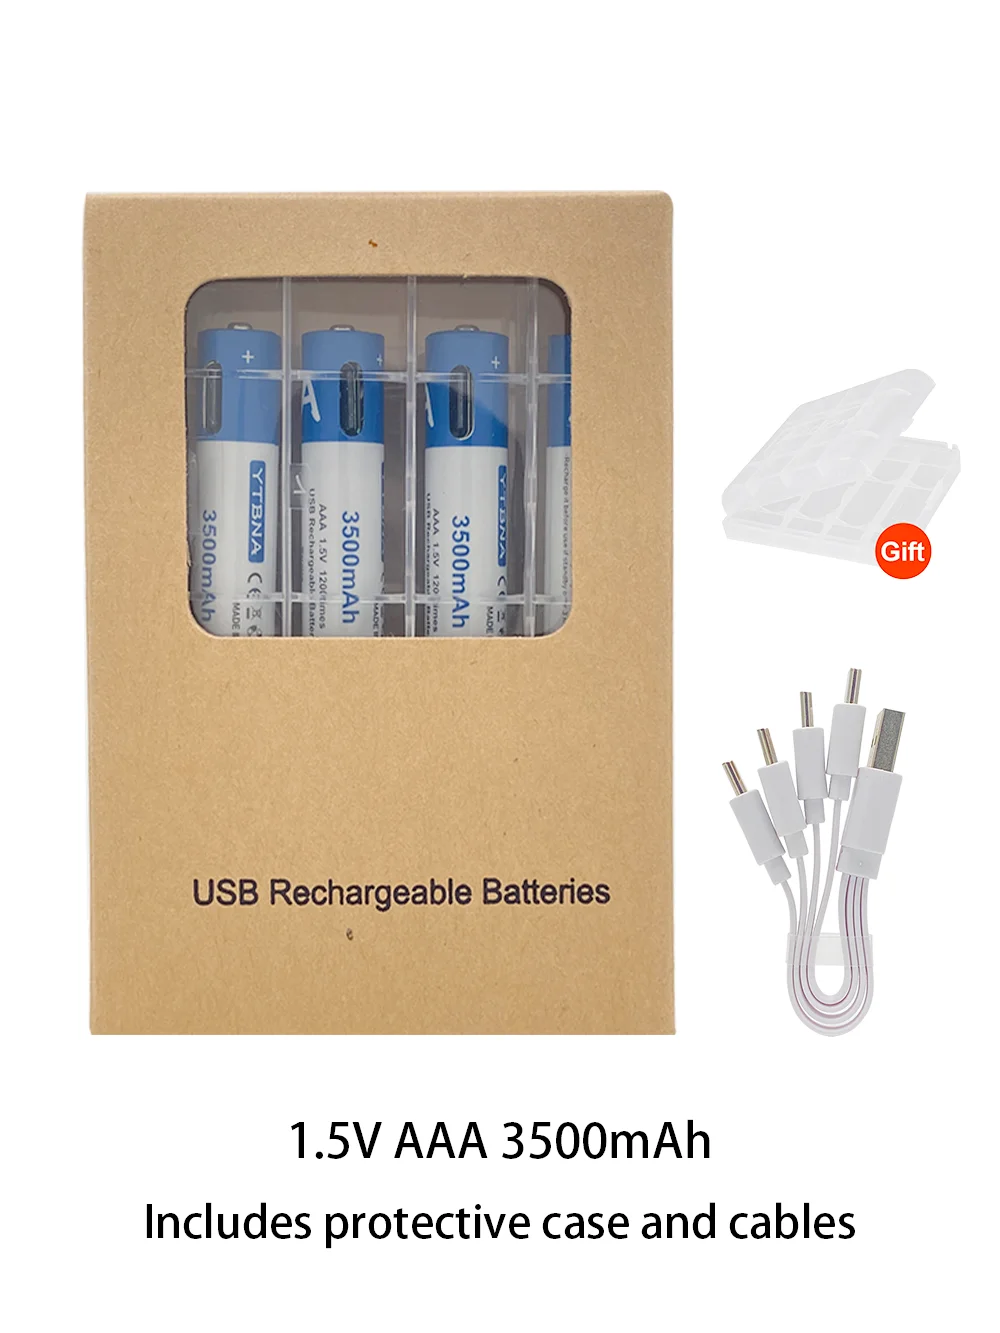 

1-24PCS YTBNA 1.5V AAA 3500mAh Rechargeable Battery 3A AAA Li-ion Batteries USB Charging for Camera Flashlight Toys + Cable